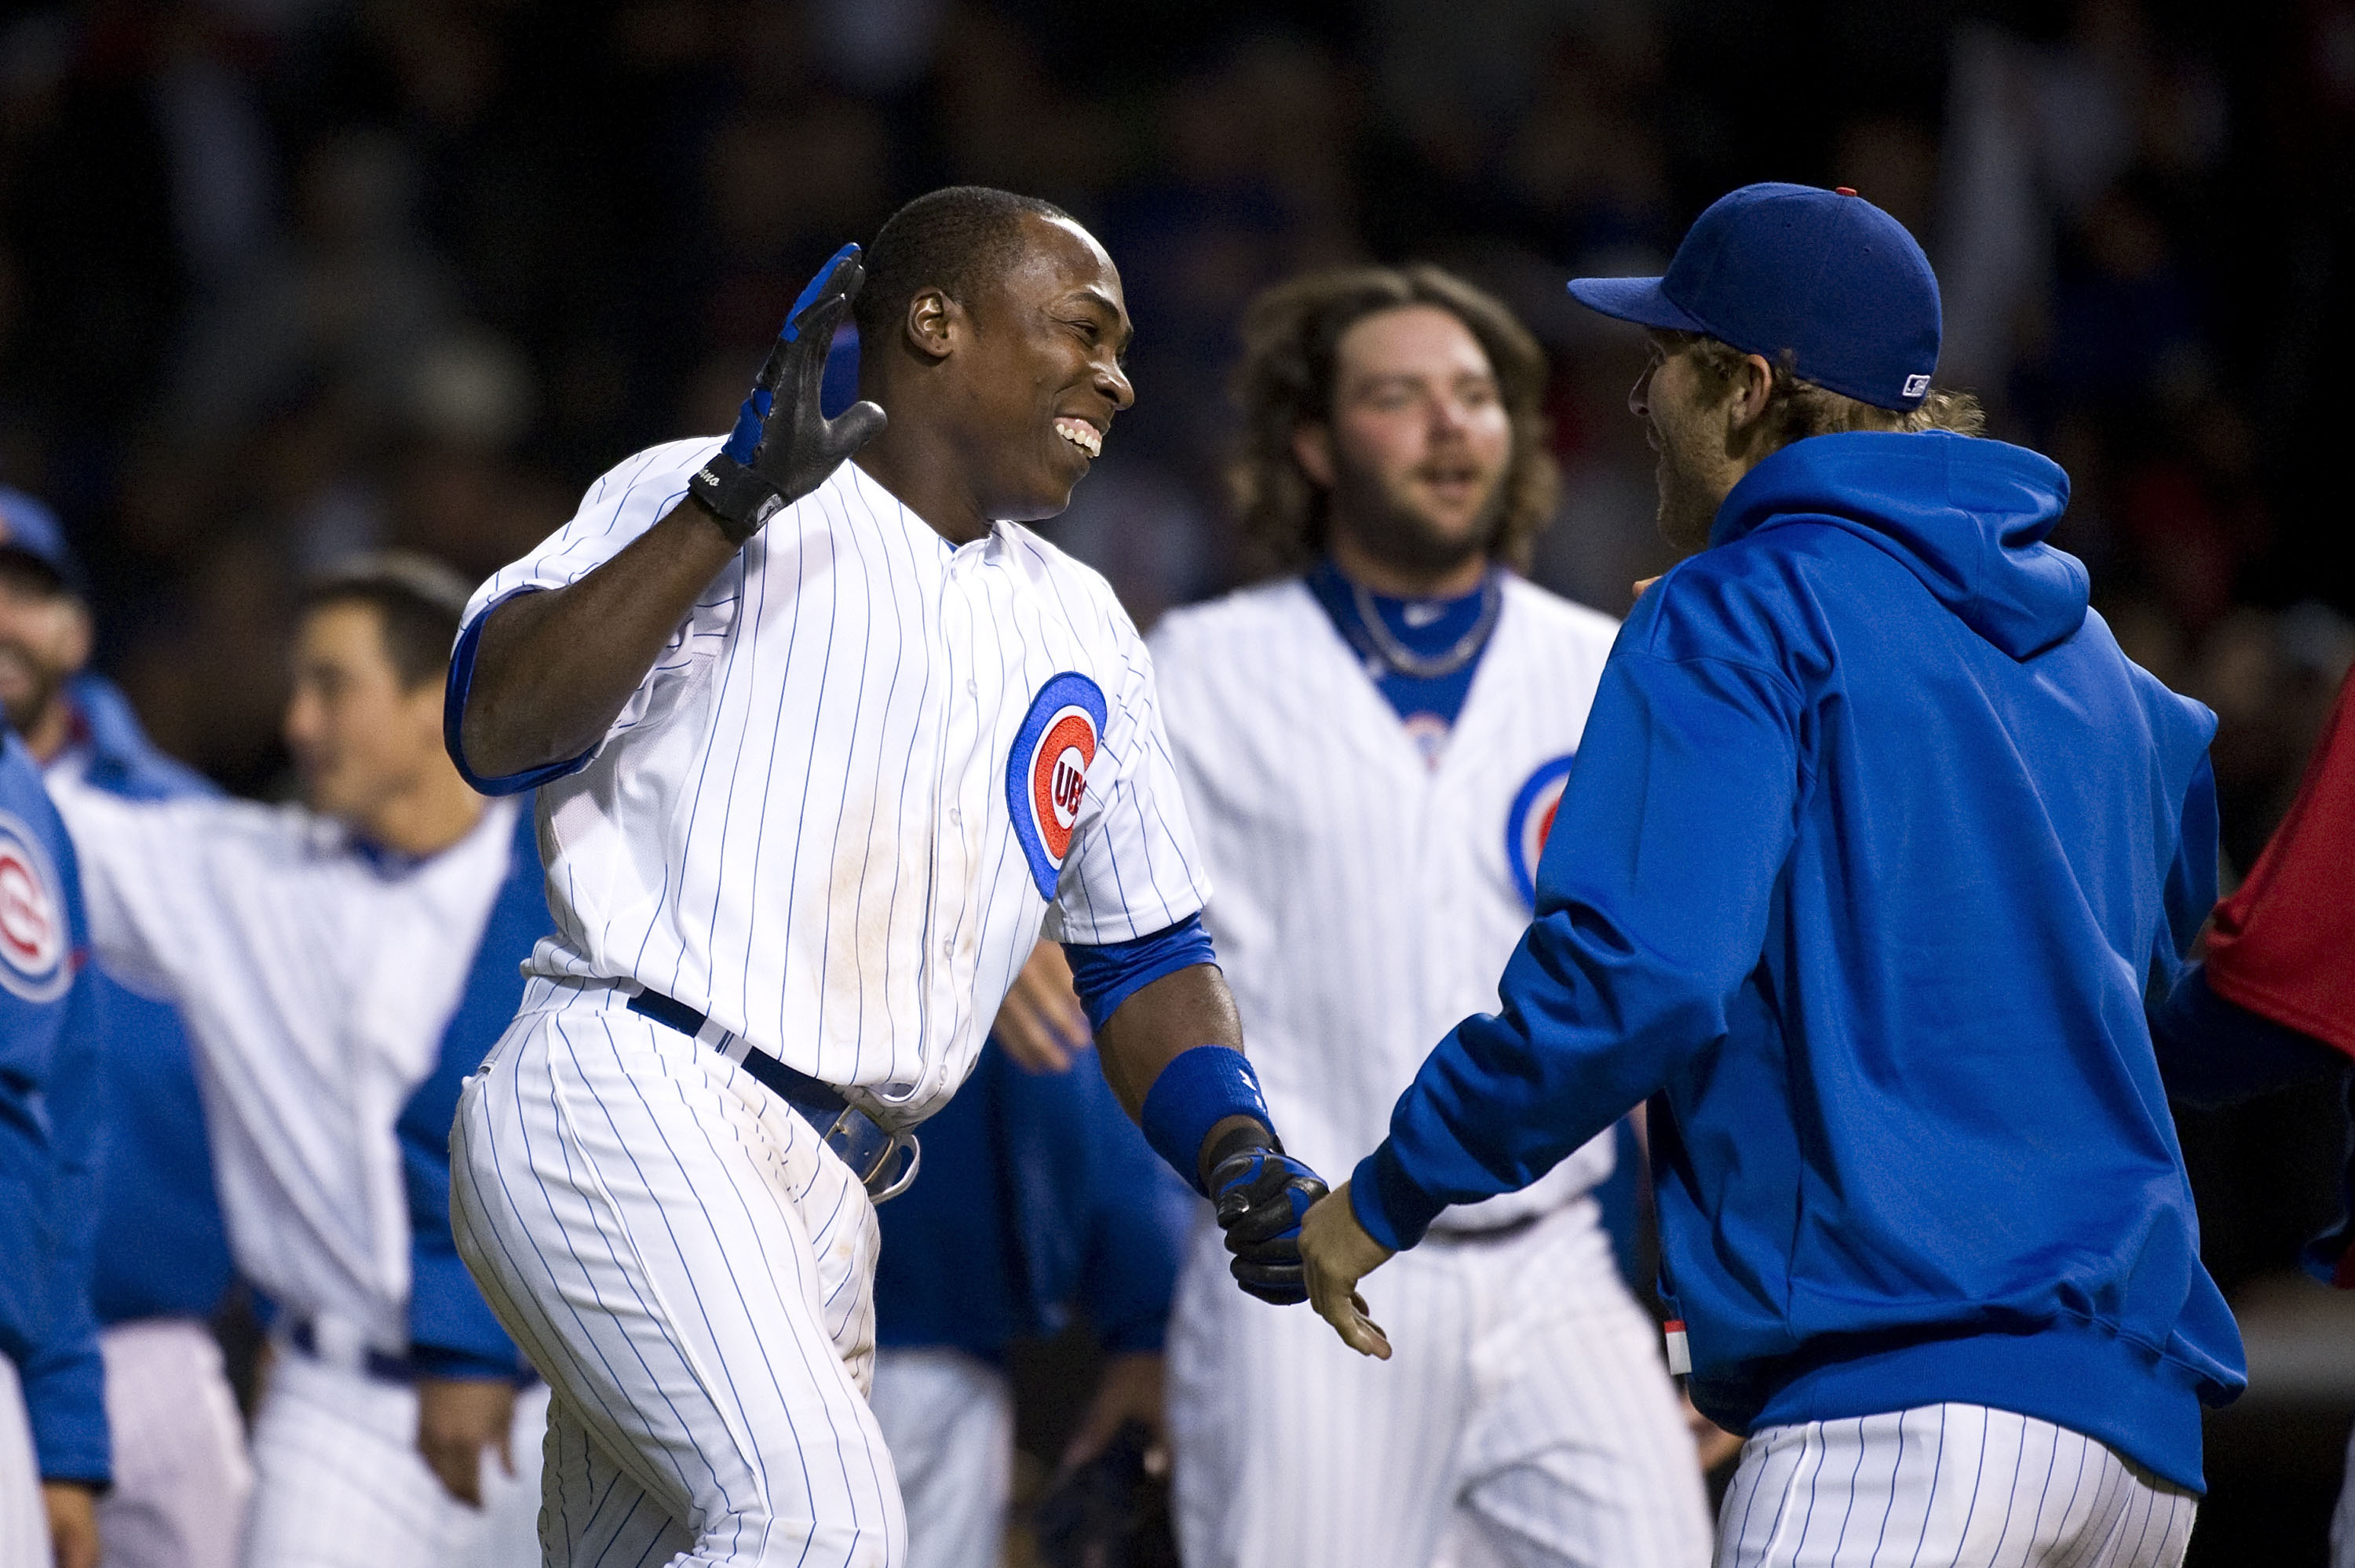 Ex-Cubs star Alfonso Soriano visits Wrigley, fans show love – NBC